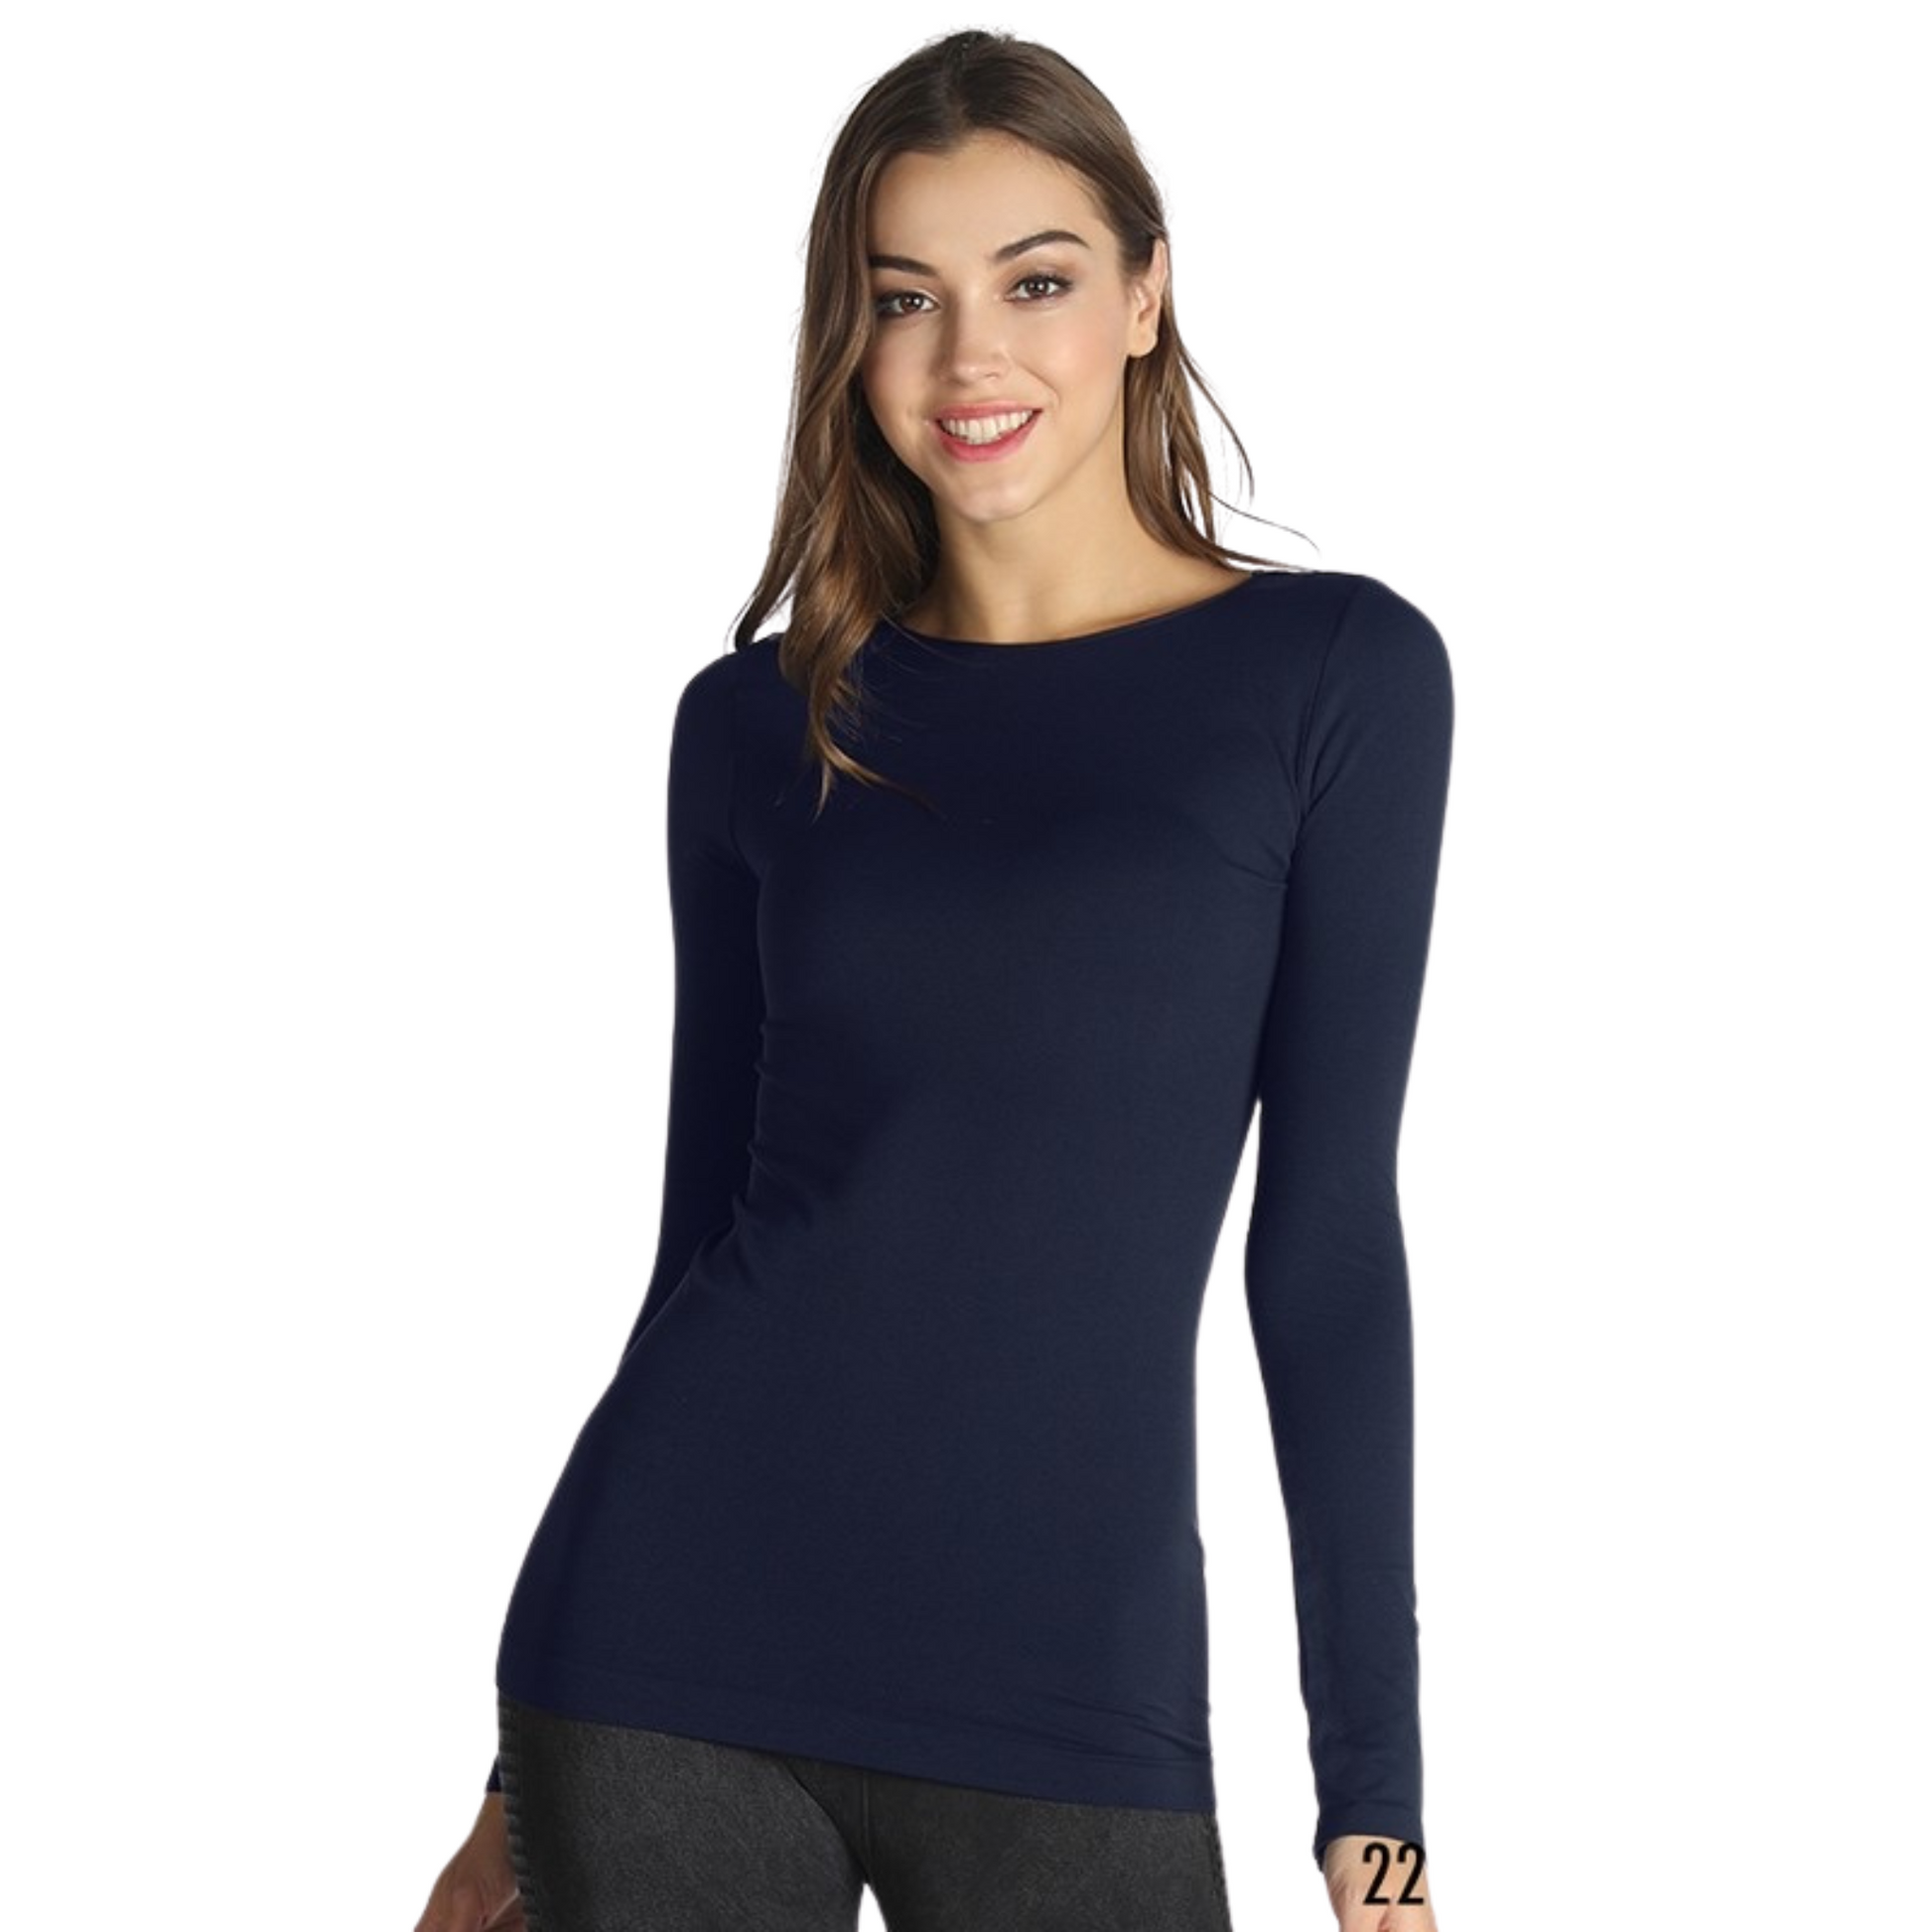 This fitted long sleeve shirt from Nikibiki is perfect for any occasion. With a wide neckline and a variety of colors available, this shirt is both comfortable and stylish. The fitted design ensures that the shirt flatters the figure.